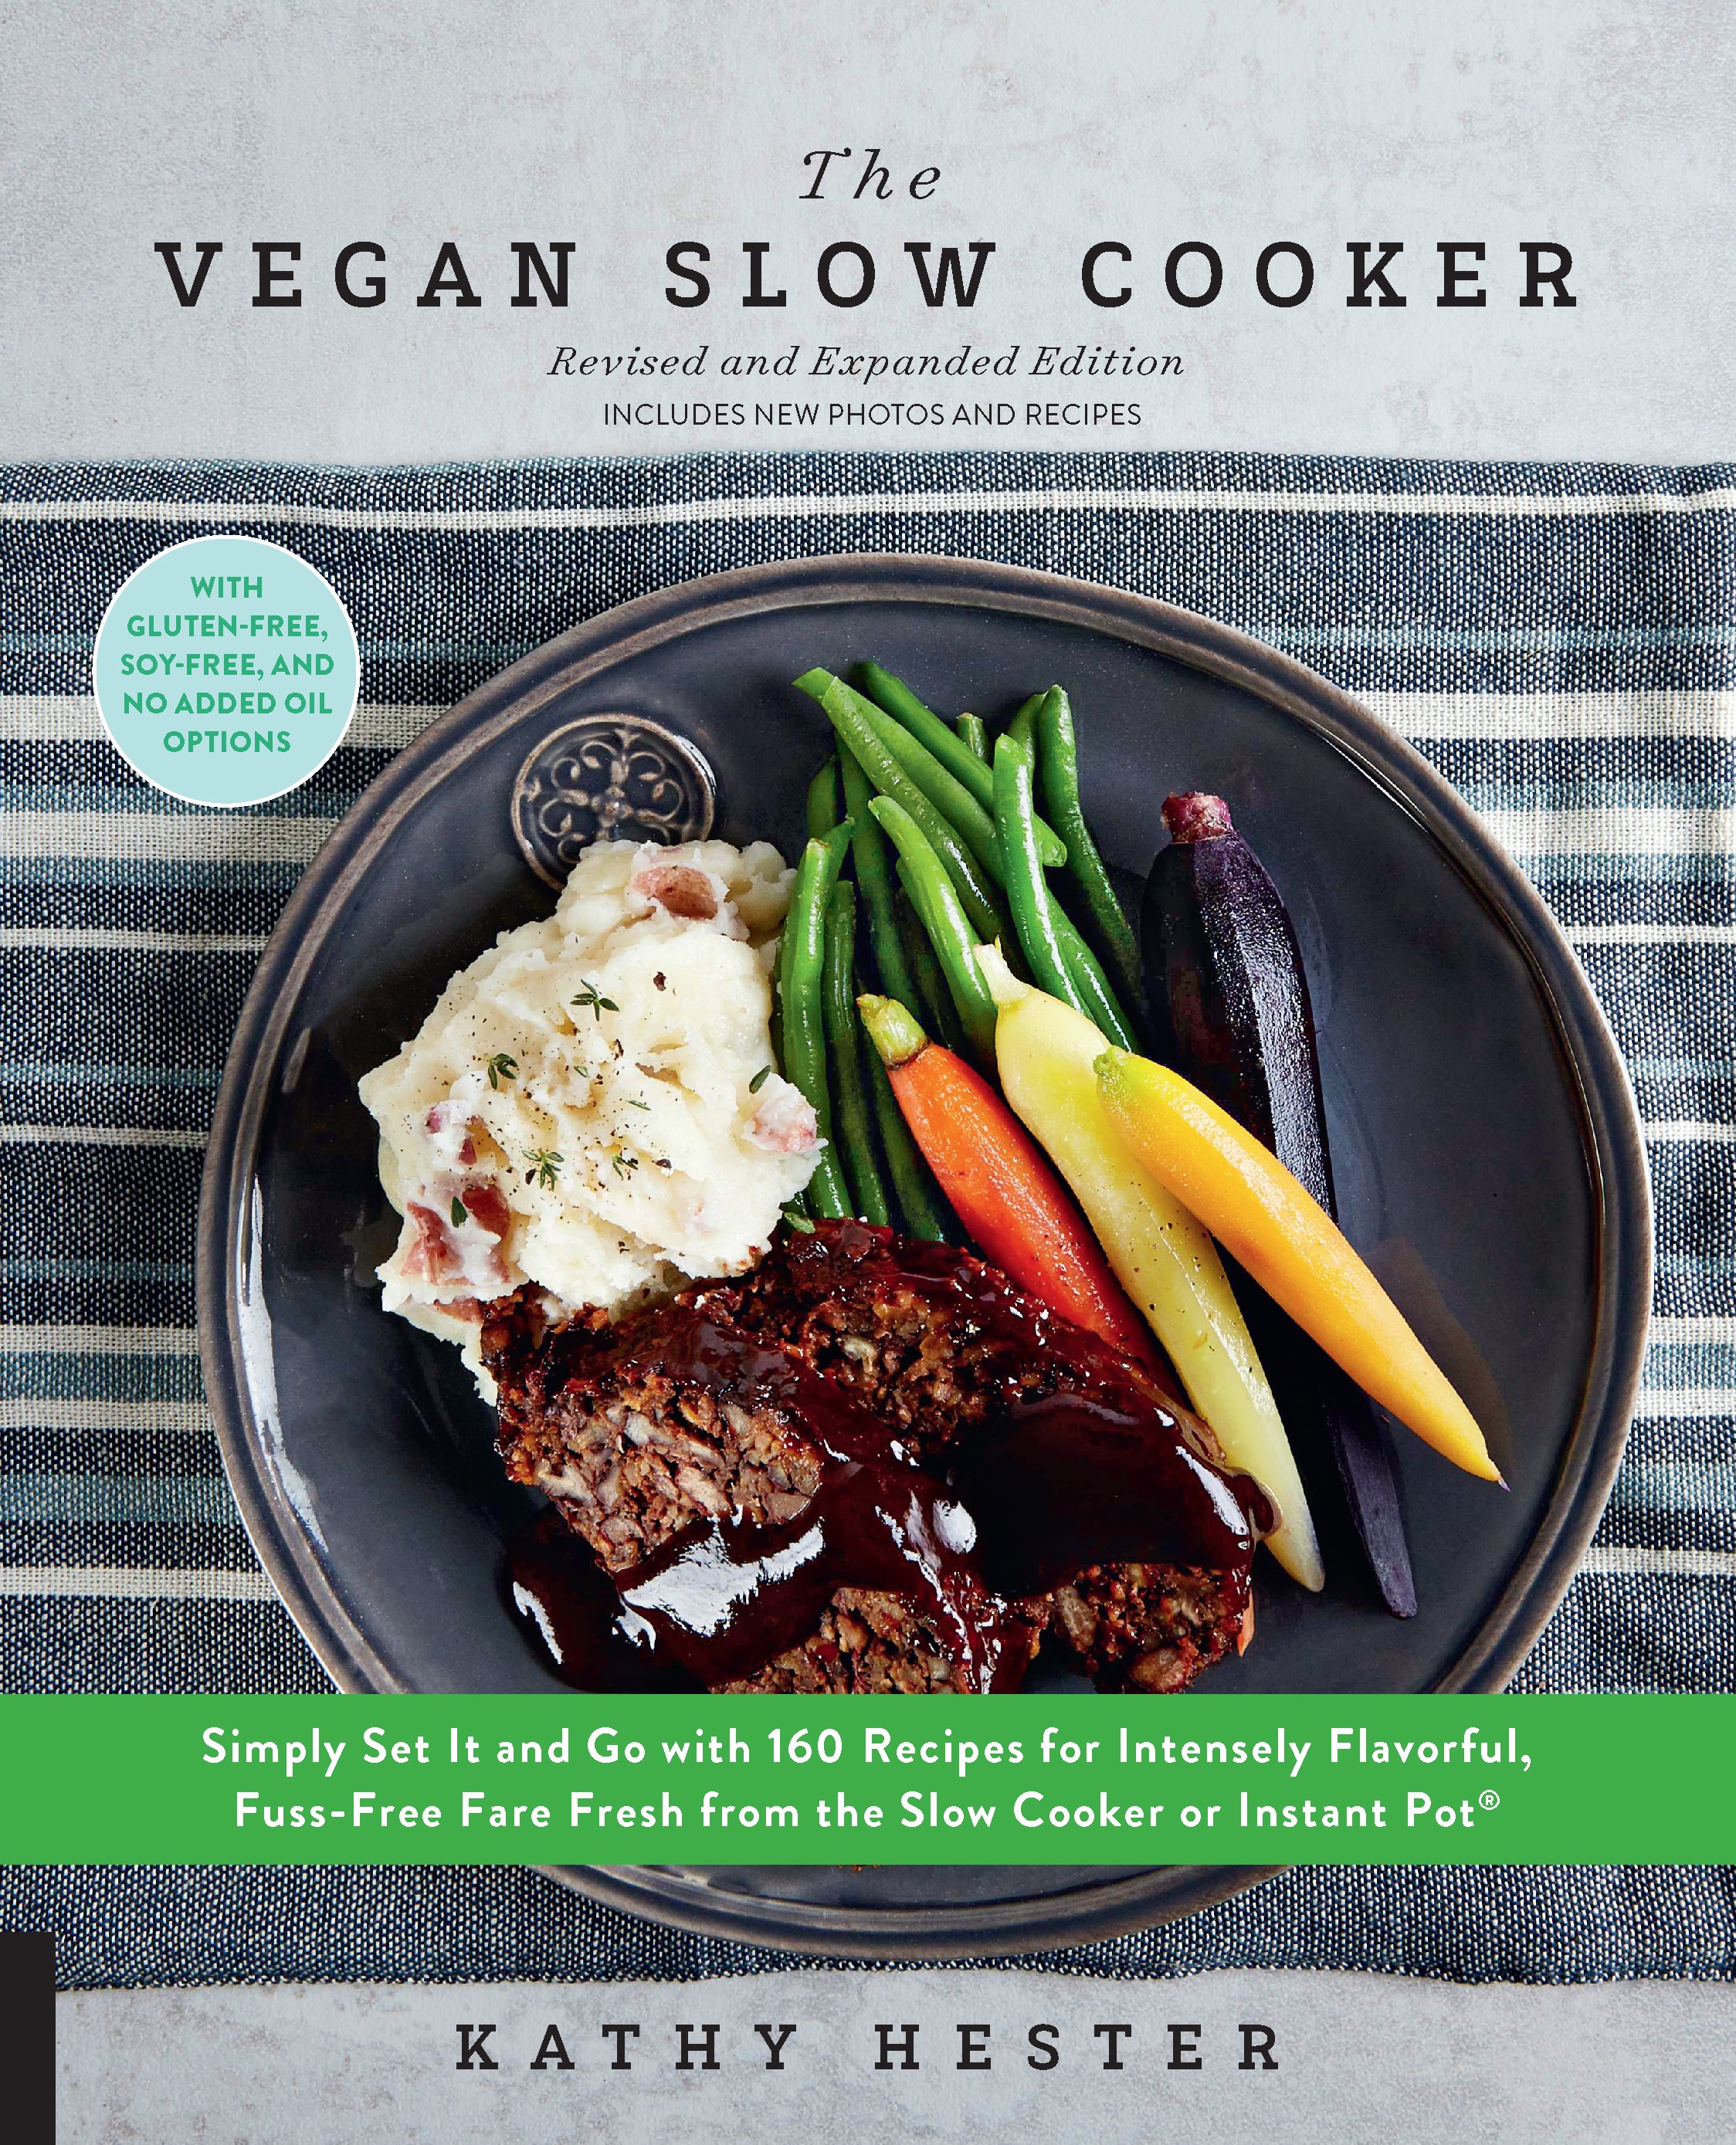 Cookbook cover for THE VEGAN SLOW COOKER, Revised and Expanded: Simply Set It and Go with 160 Recipes for Intensely Flavorful, Fuss-Free Fare Fresh from the Slow Cooker or Instant Pot®